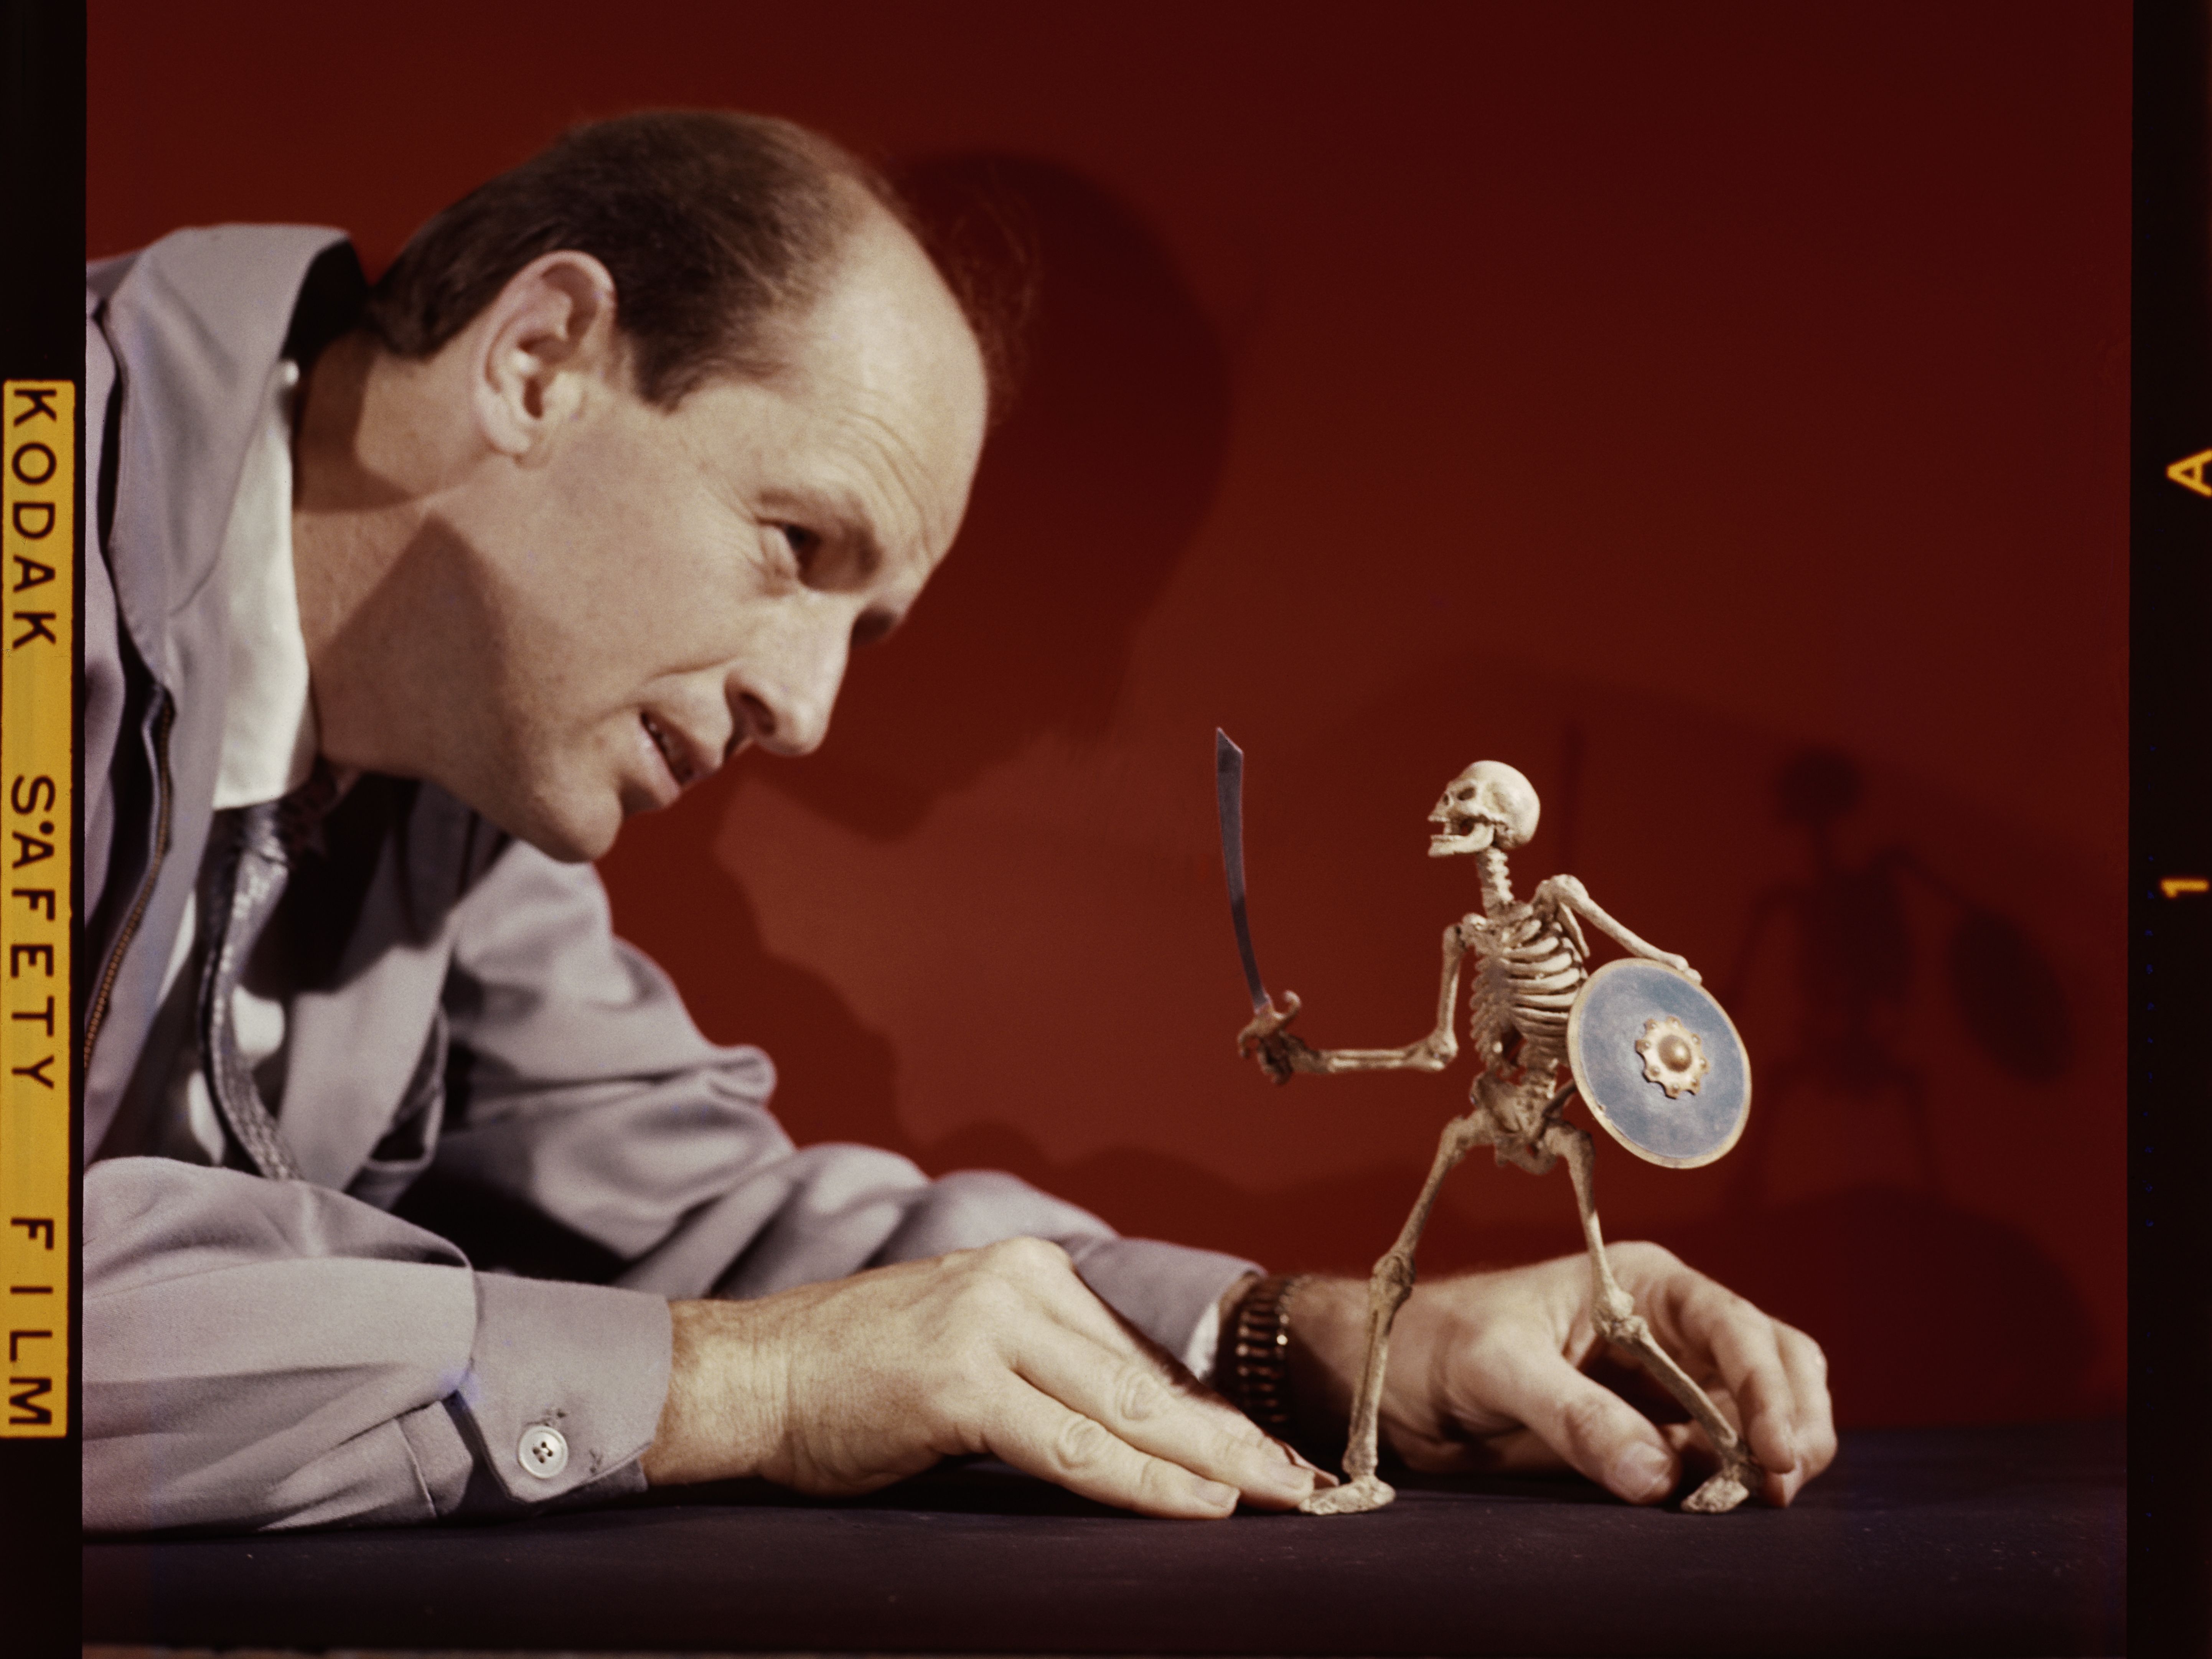 Ray Harryhausen (1920-2013)​ animating a skeleton model from The 7th Voyage of Sinbad, 1958​ © The Ray and Diana Harryhausen Foundation​.